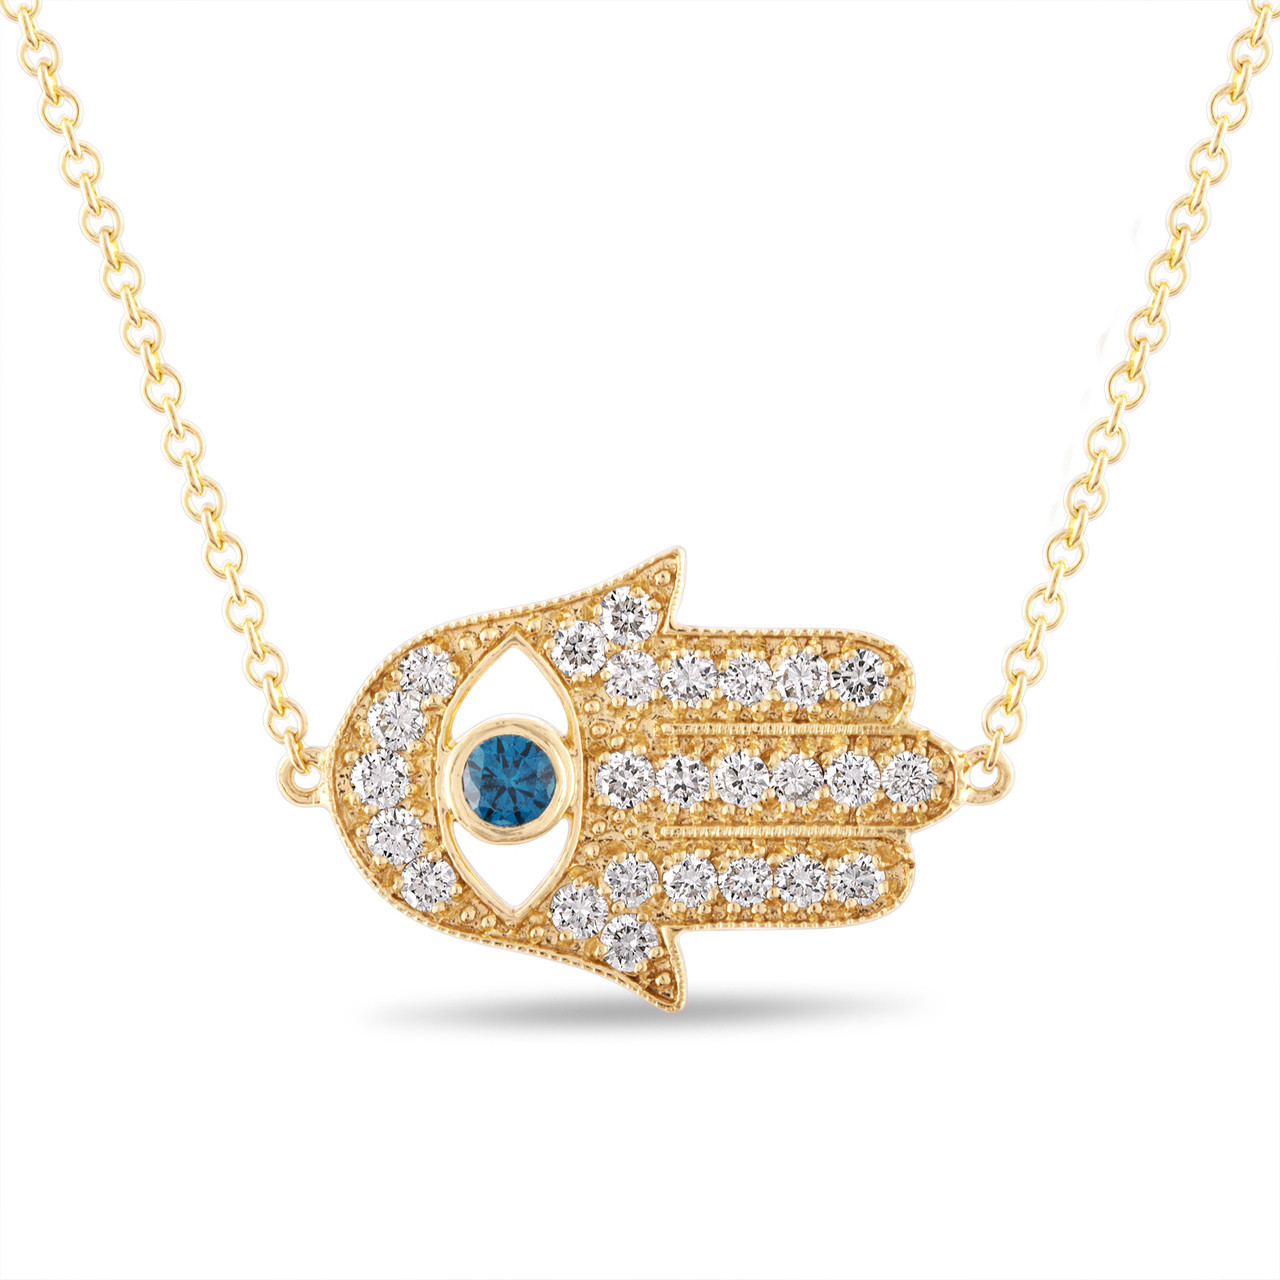 Evil Eye Necklace | Stylish and Protective Jewelry with the Evil Eye Symbol  – NEMICHAND JEWELS